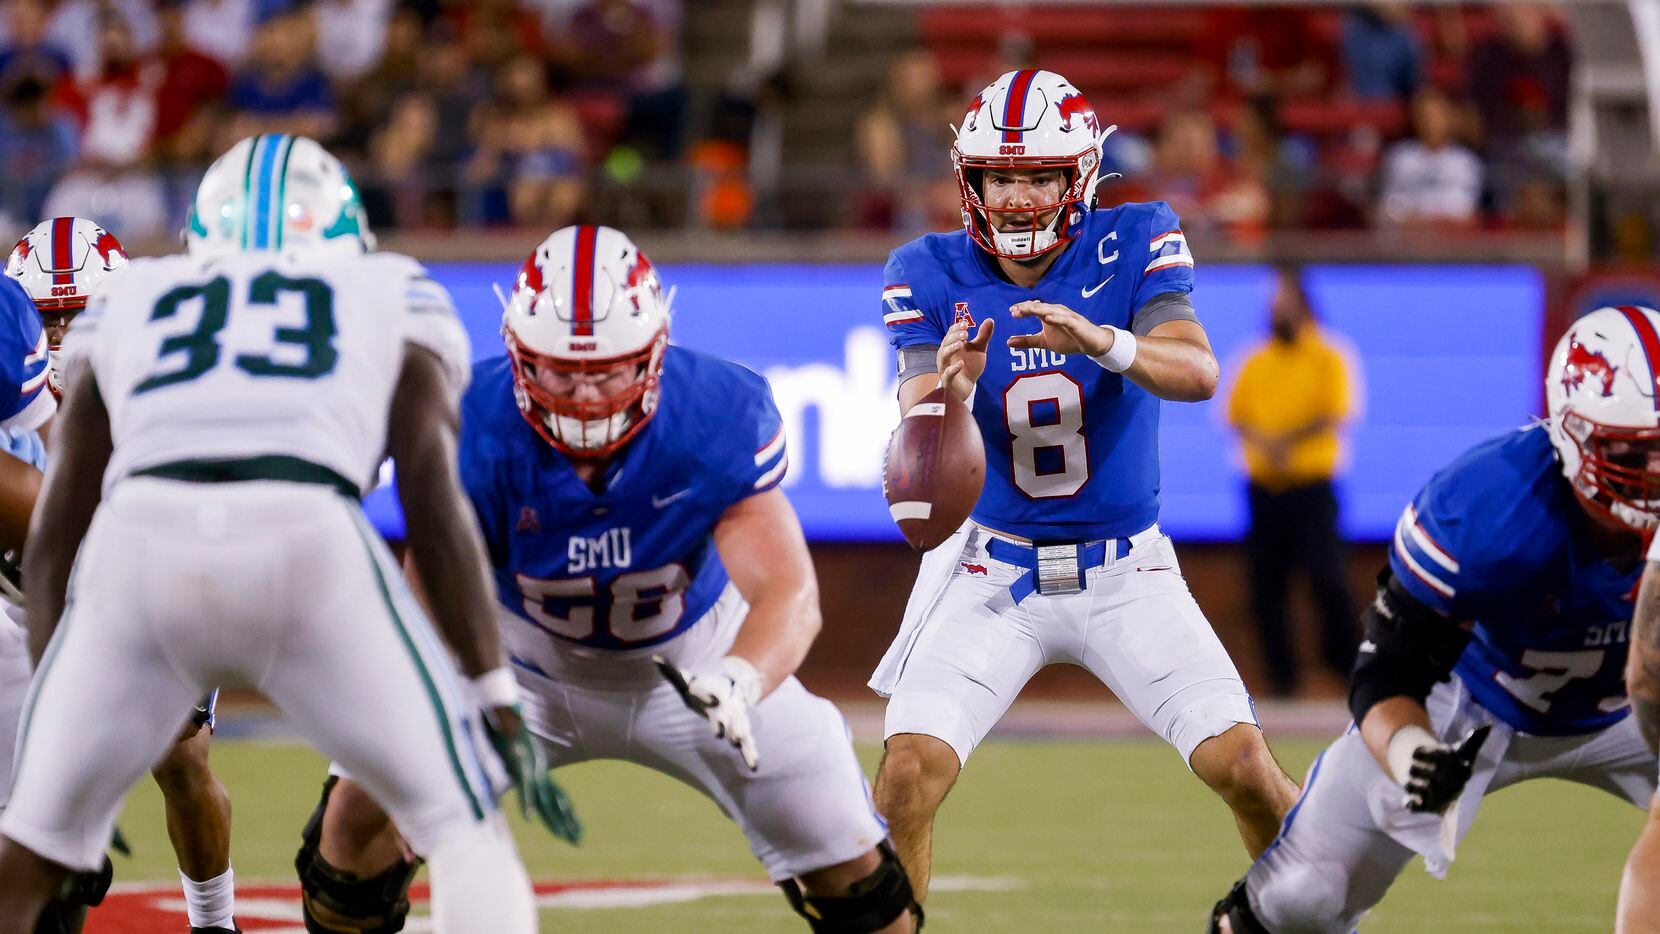 Smu Qb Tanner Mordecai Named Aac Offensive Player Of The Week For Fourth Time